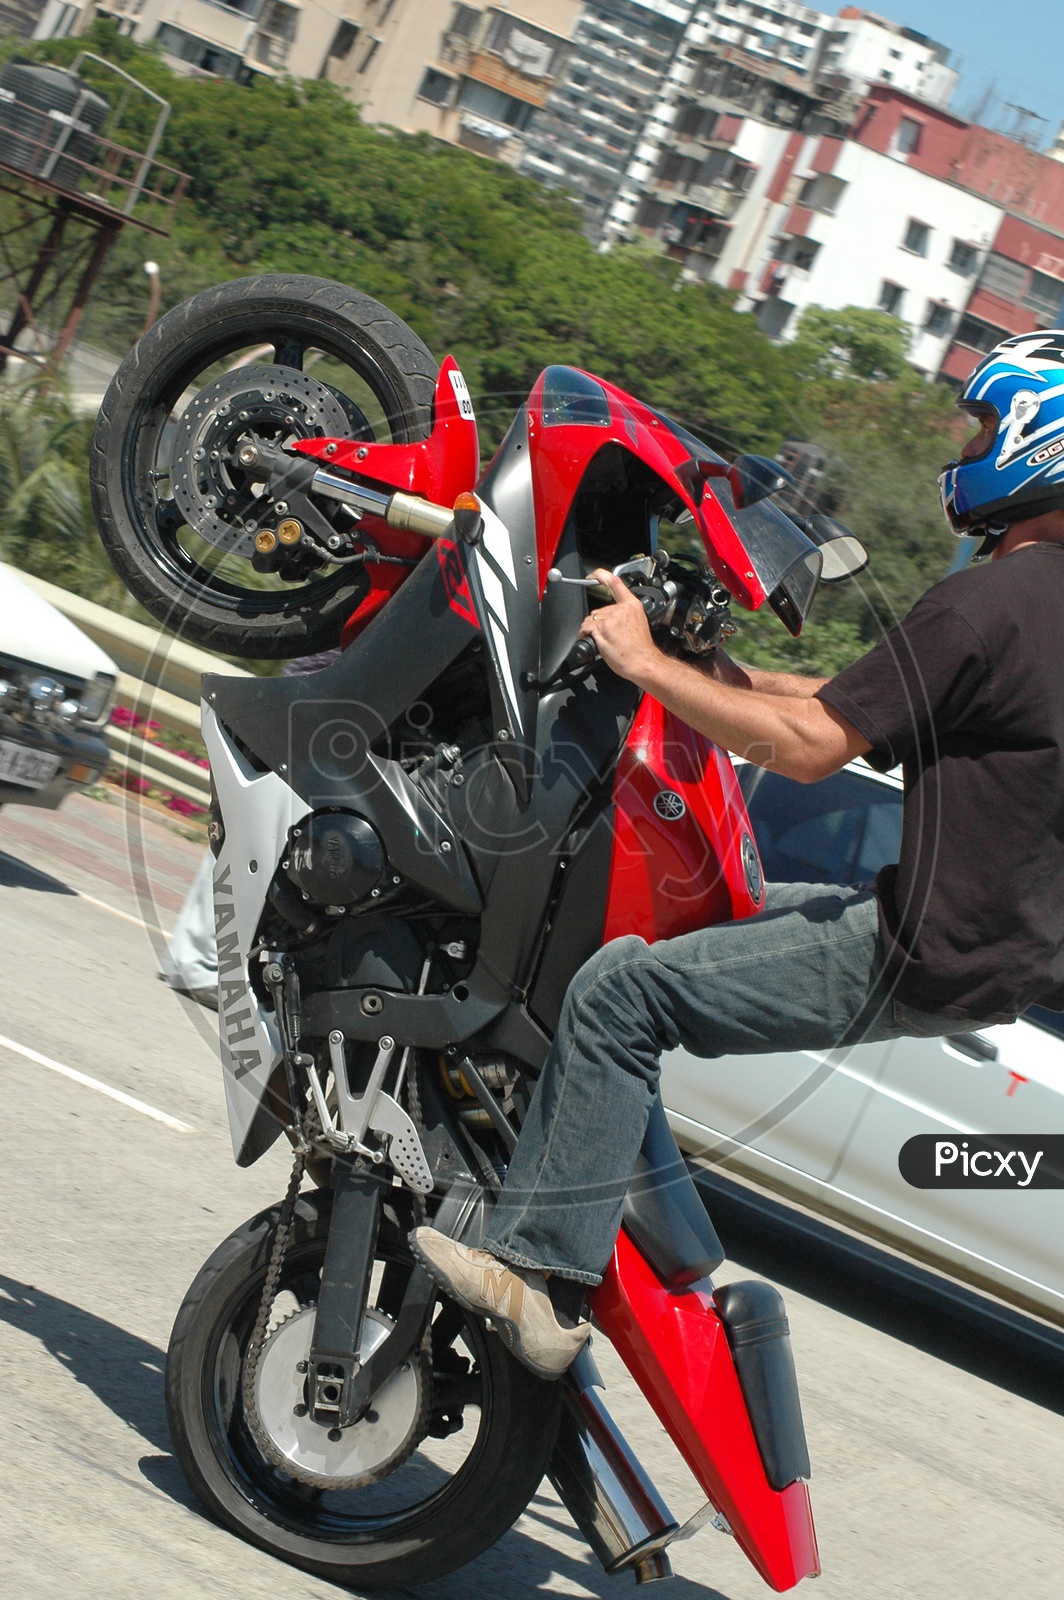 Bike Stunts Performing By a Professional For a Movie Sequence at Mumbai Race Course